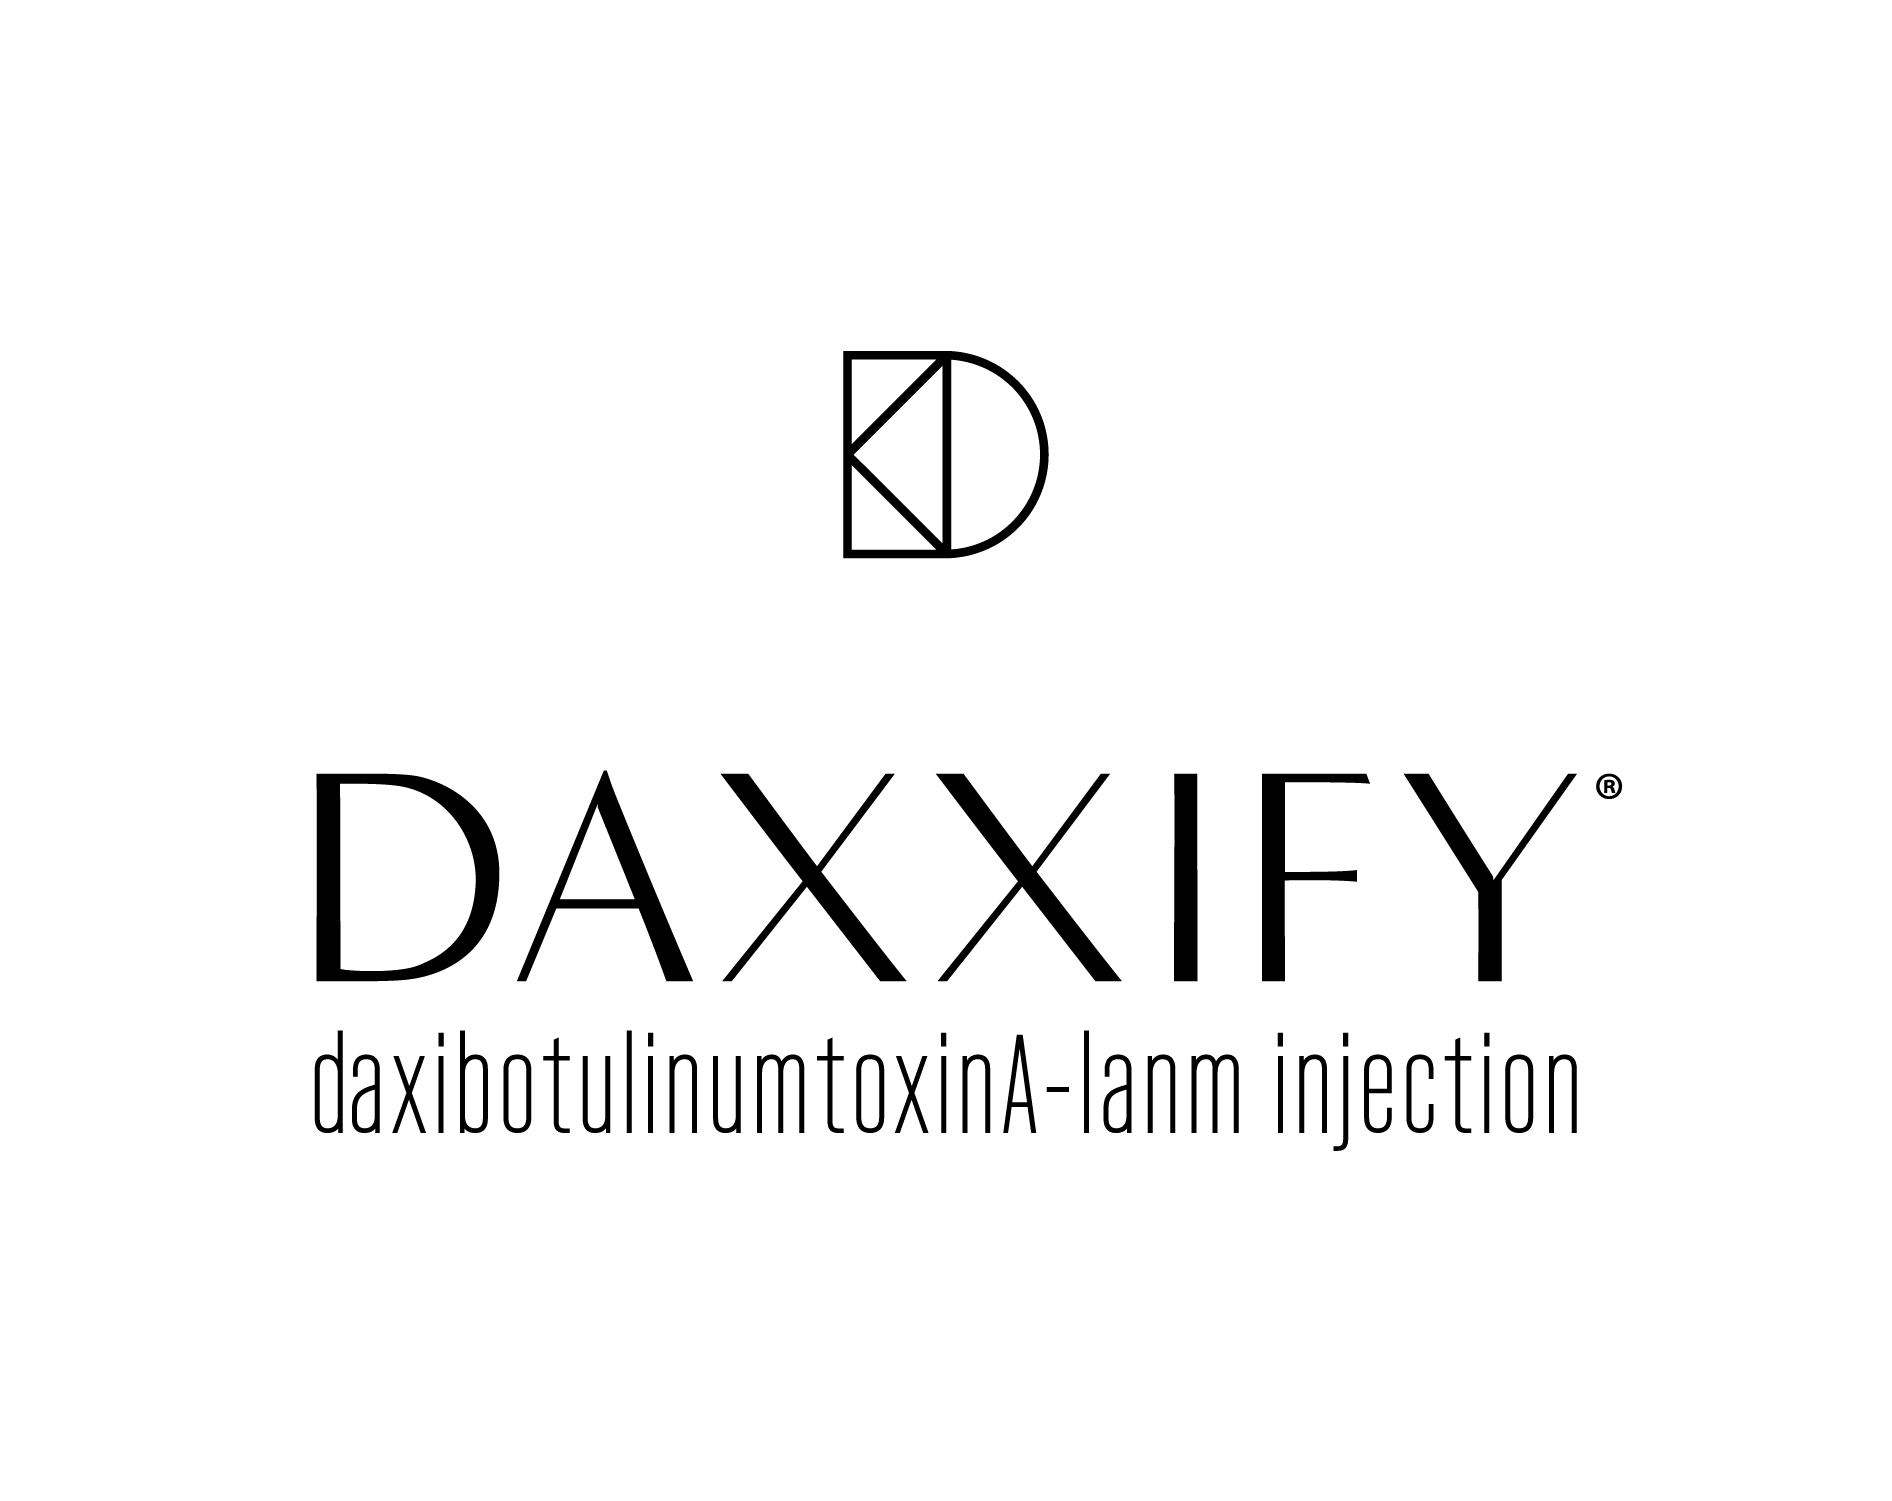 Daxxify® in Indianapolis, Indiana